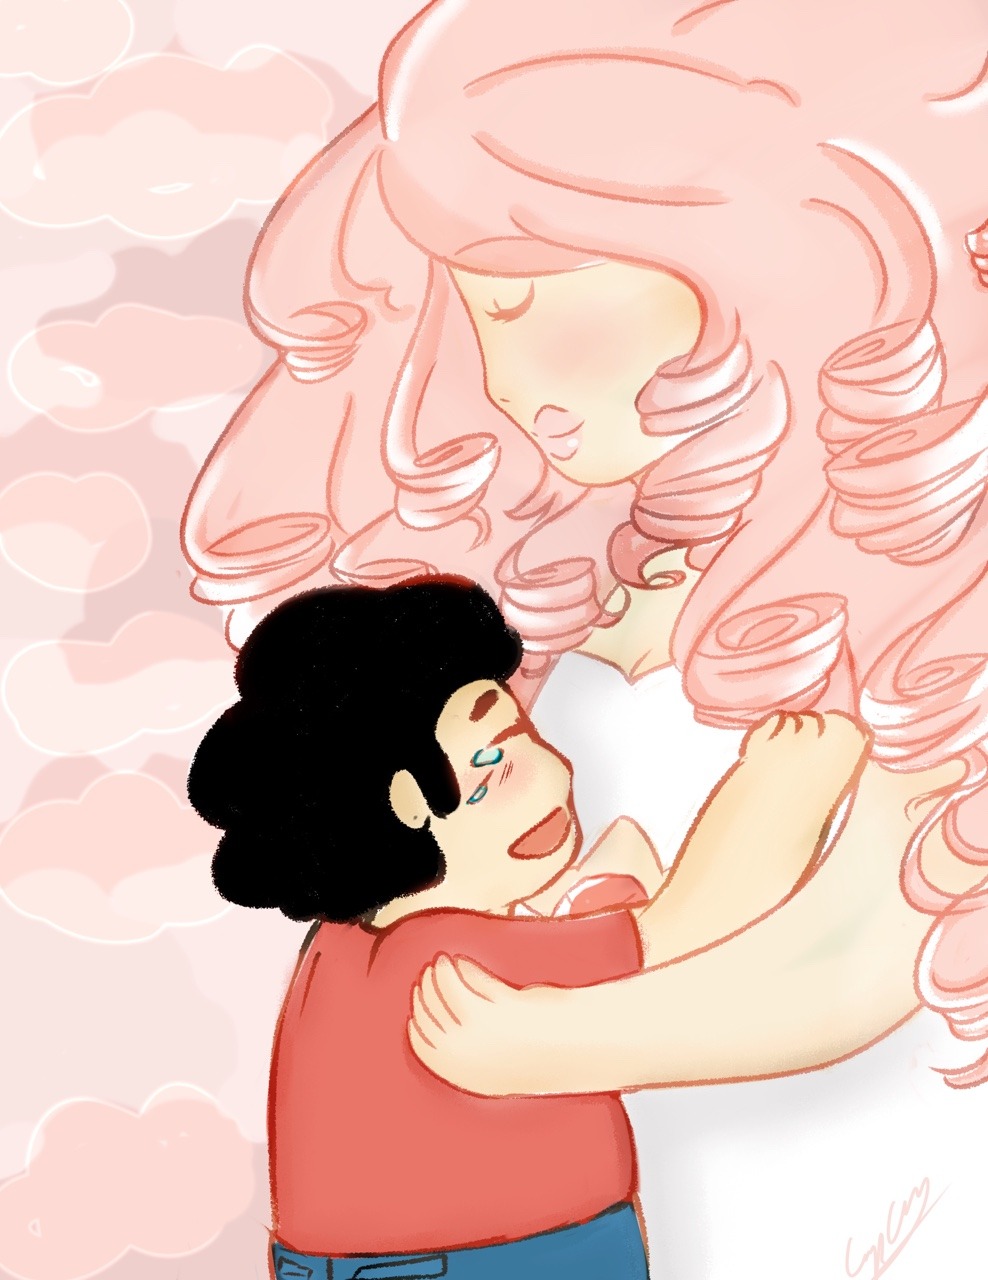 letsdoubletheerens:  Steven dreams of being with his mom in roses room